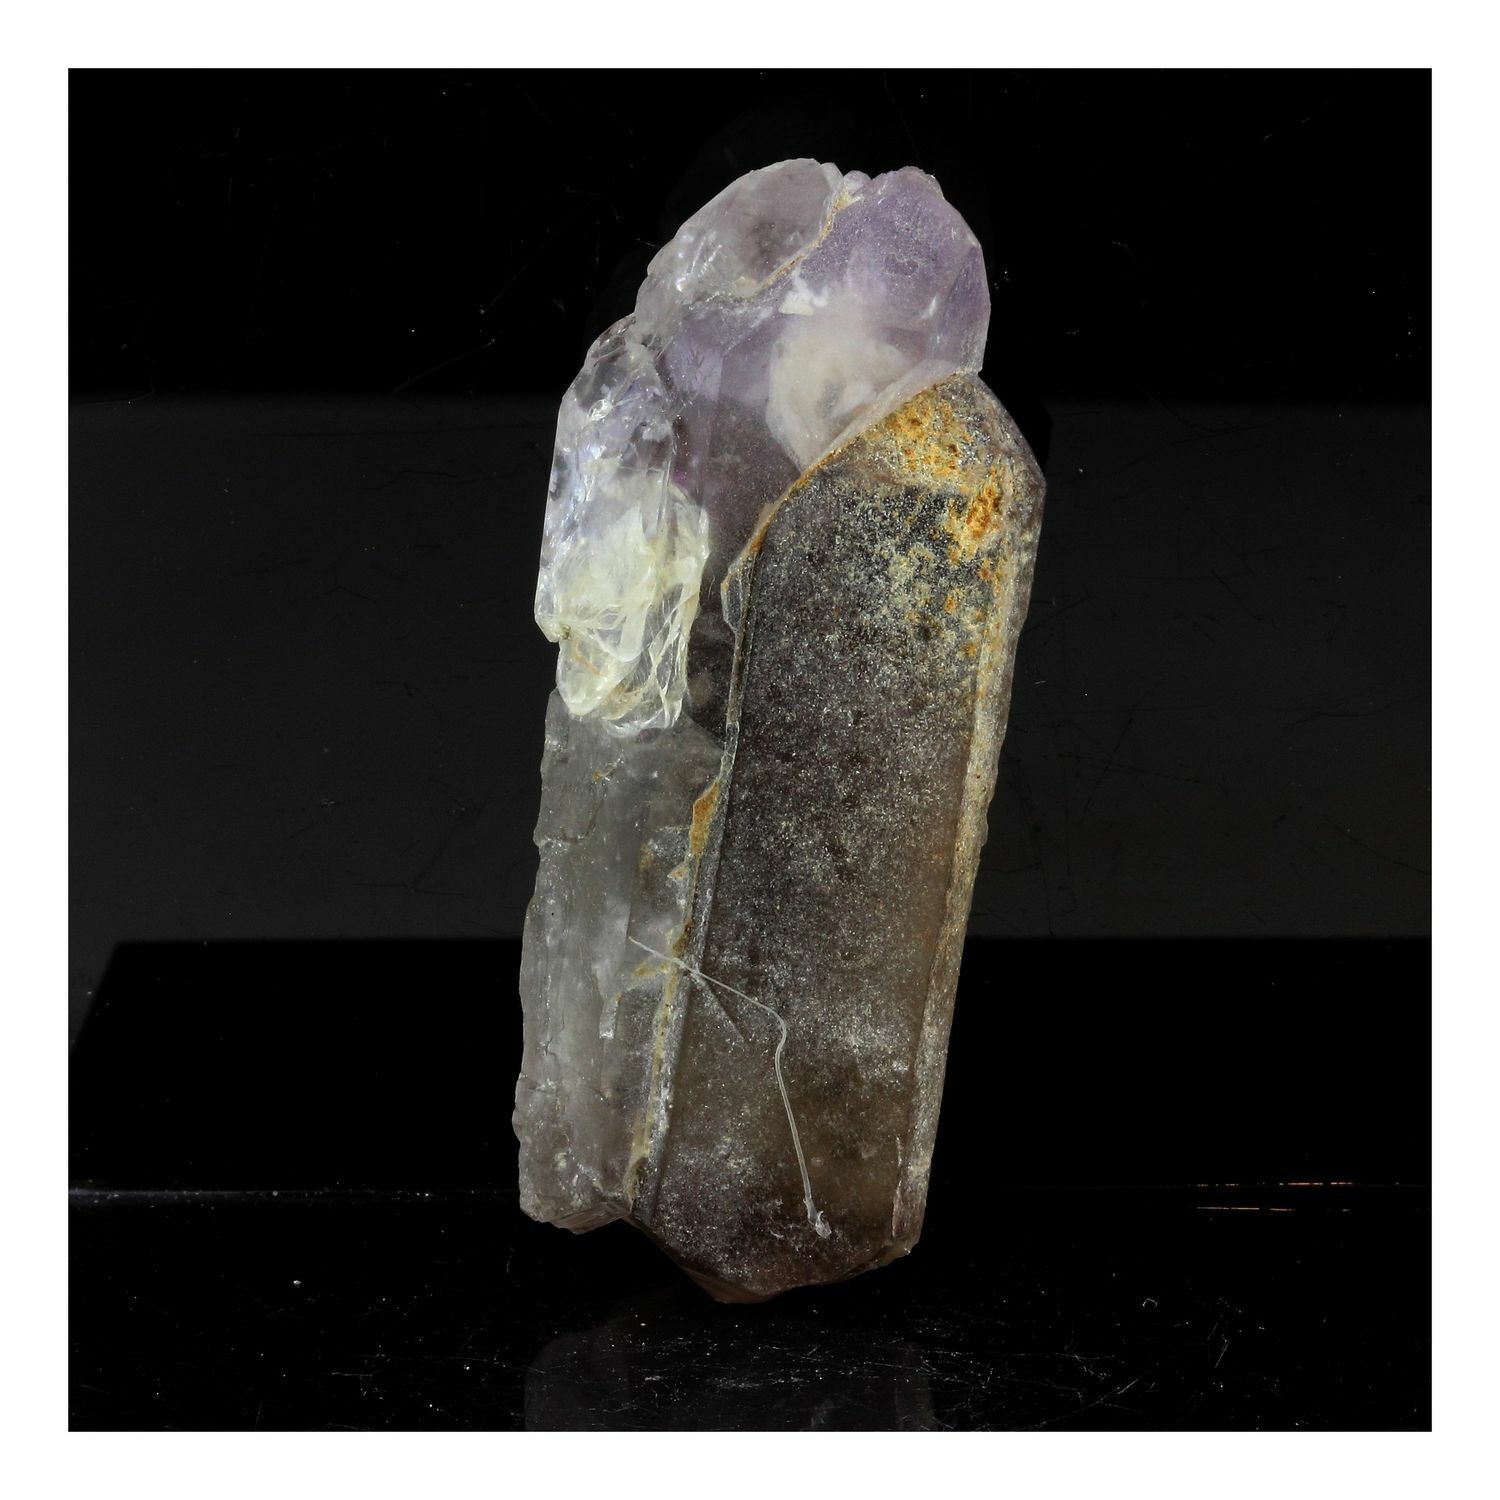 Quartz Sceptre Tinted Amethyst 186.0 Ct. Solid of / The Mont-Blanc, France